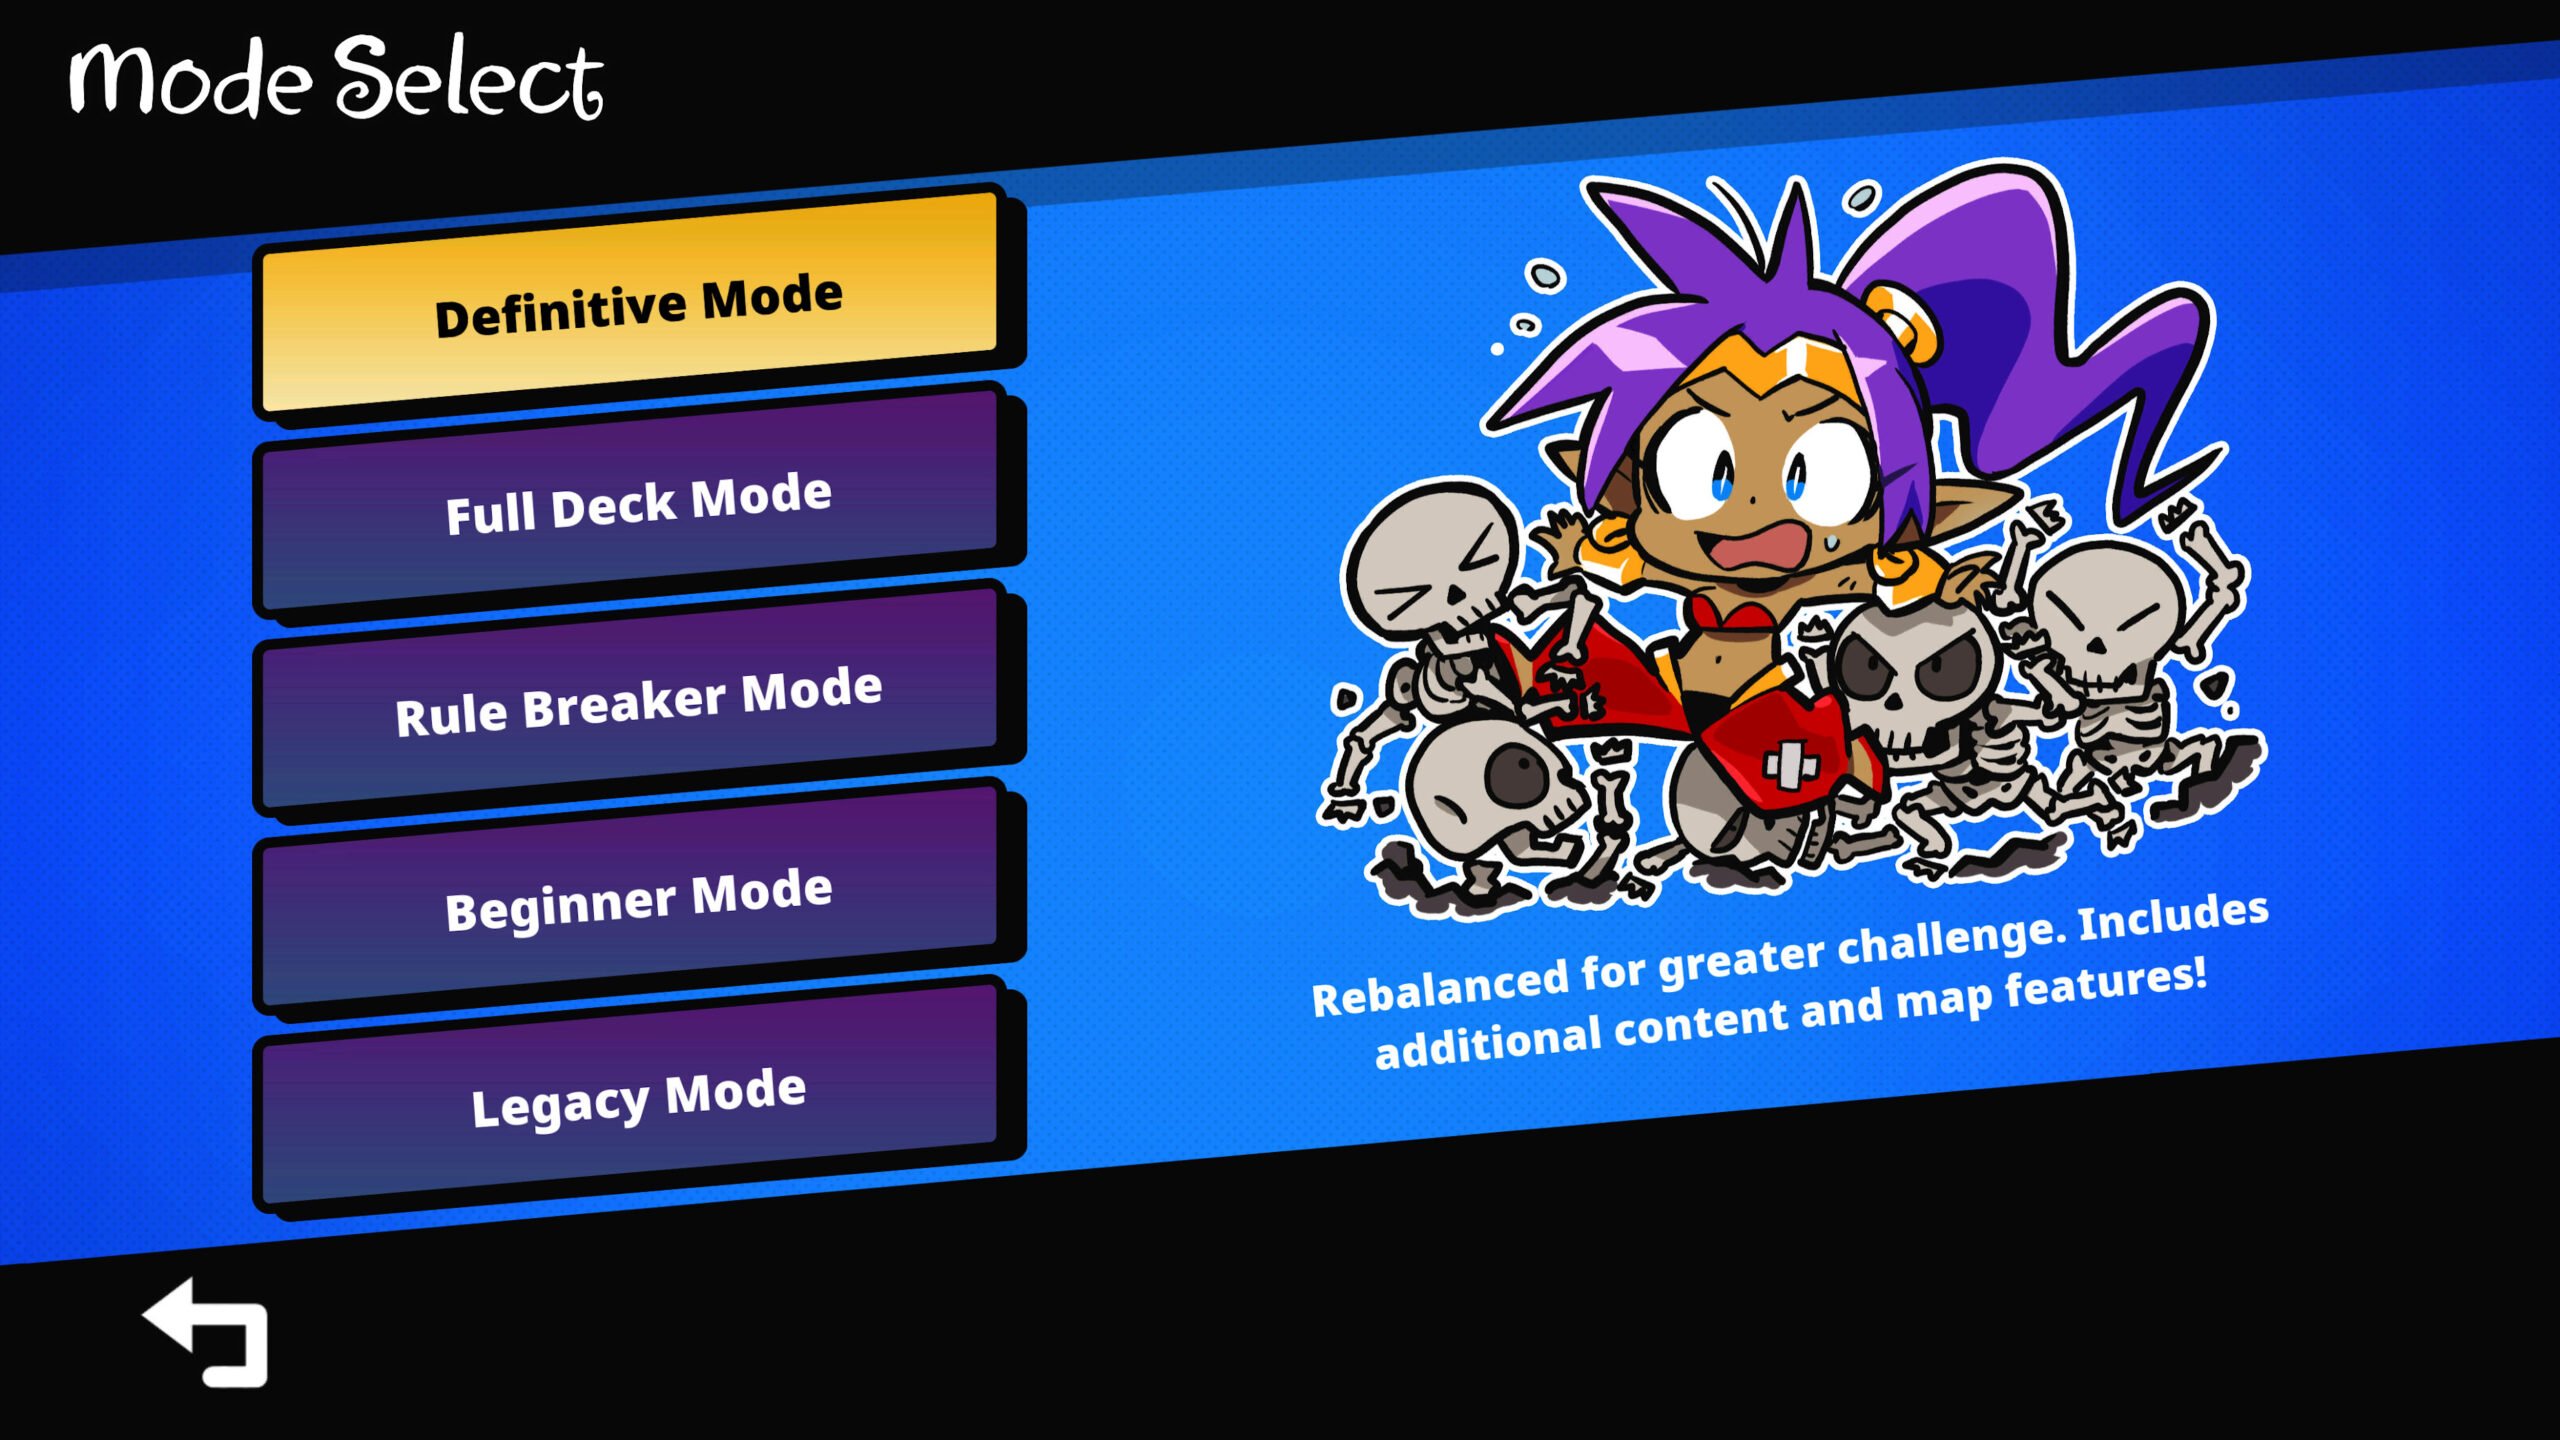 Shantae and the Seven Sirens ‘Spectacular Superstar’ update now available, adds four new modes